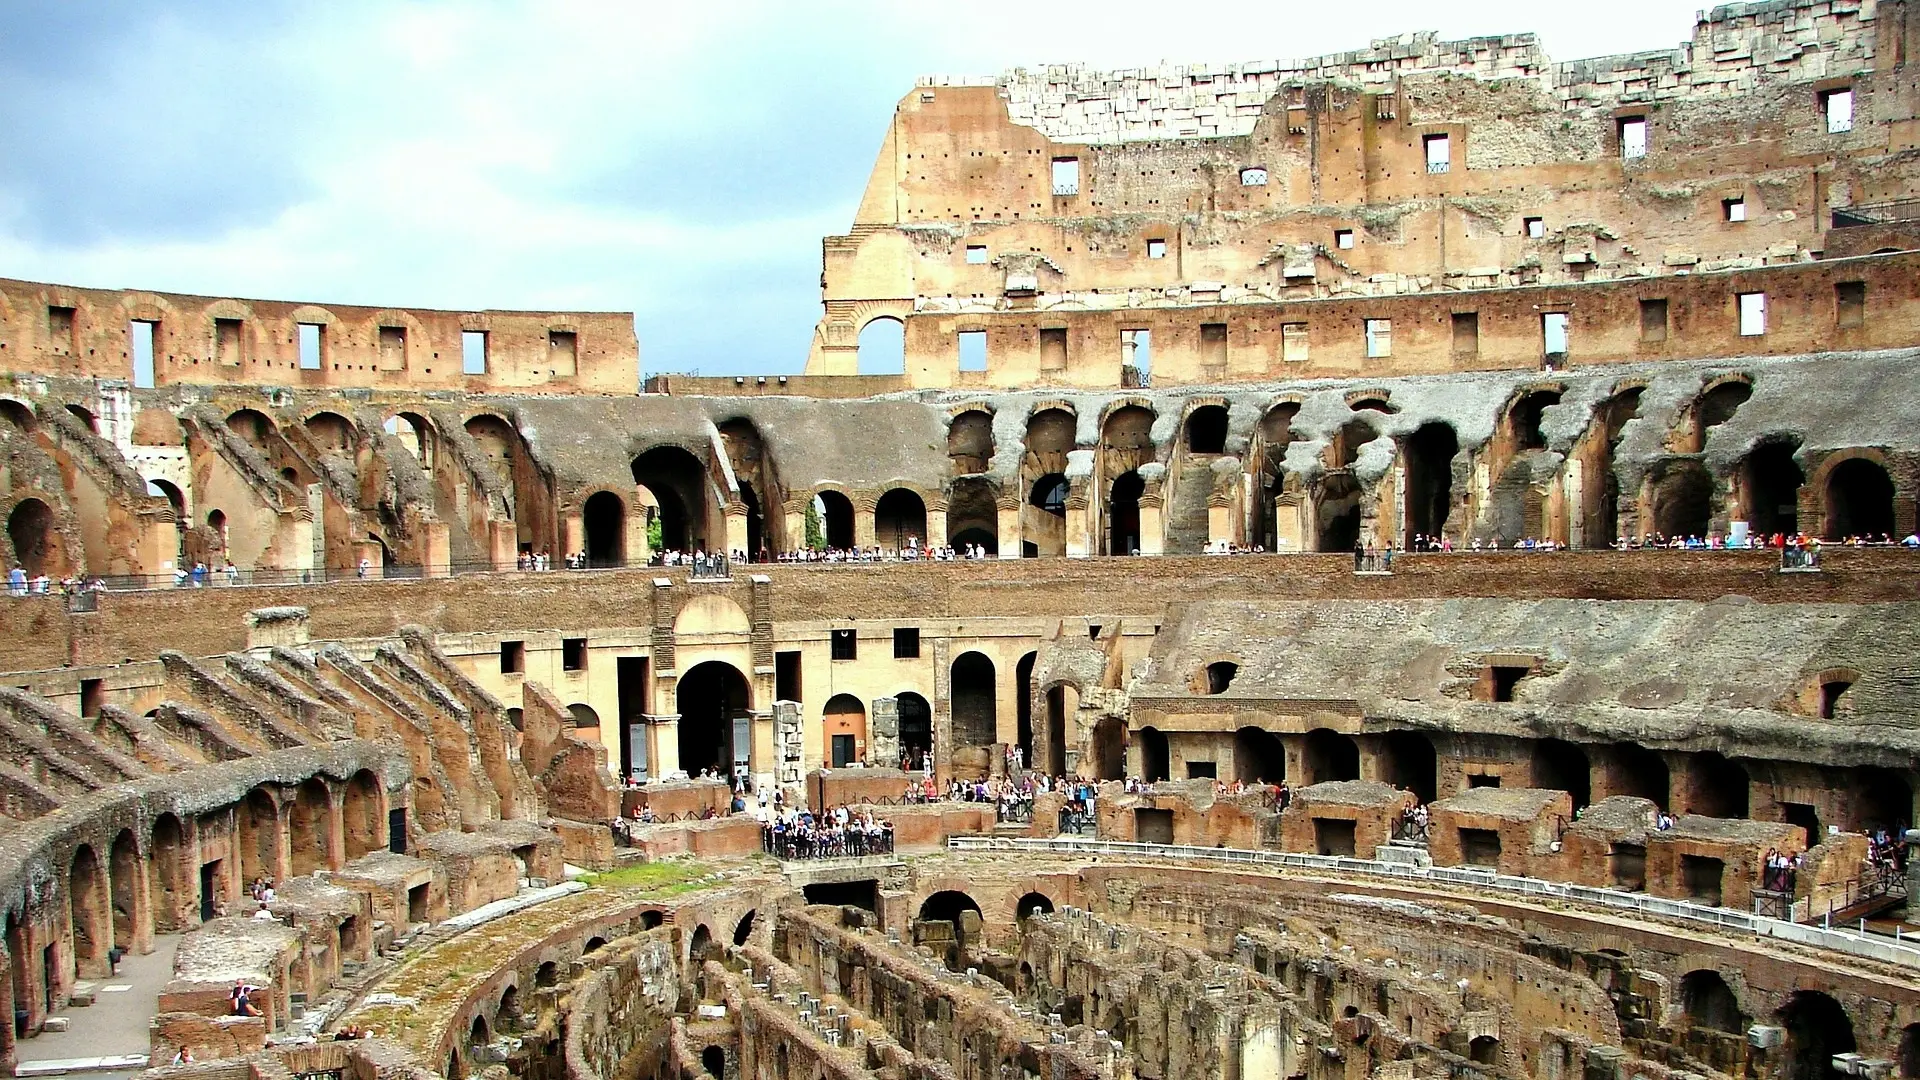 "Image showing the interior of the Colosseum in Rome during daytime, bustling with tourists exploring the ancient arena. Sunlight streams in, illuminating the aged stone walls and arches, highlighting the grandeur and scale of this historic monument."